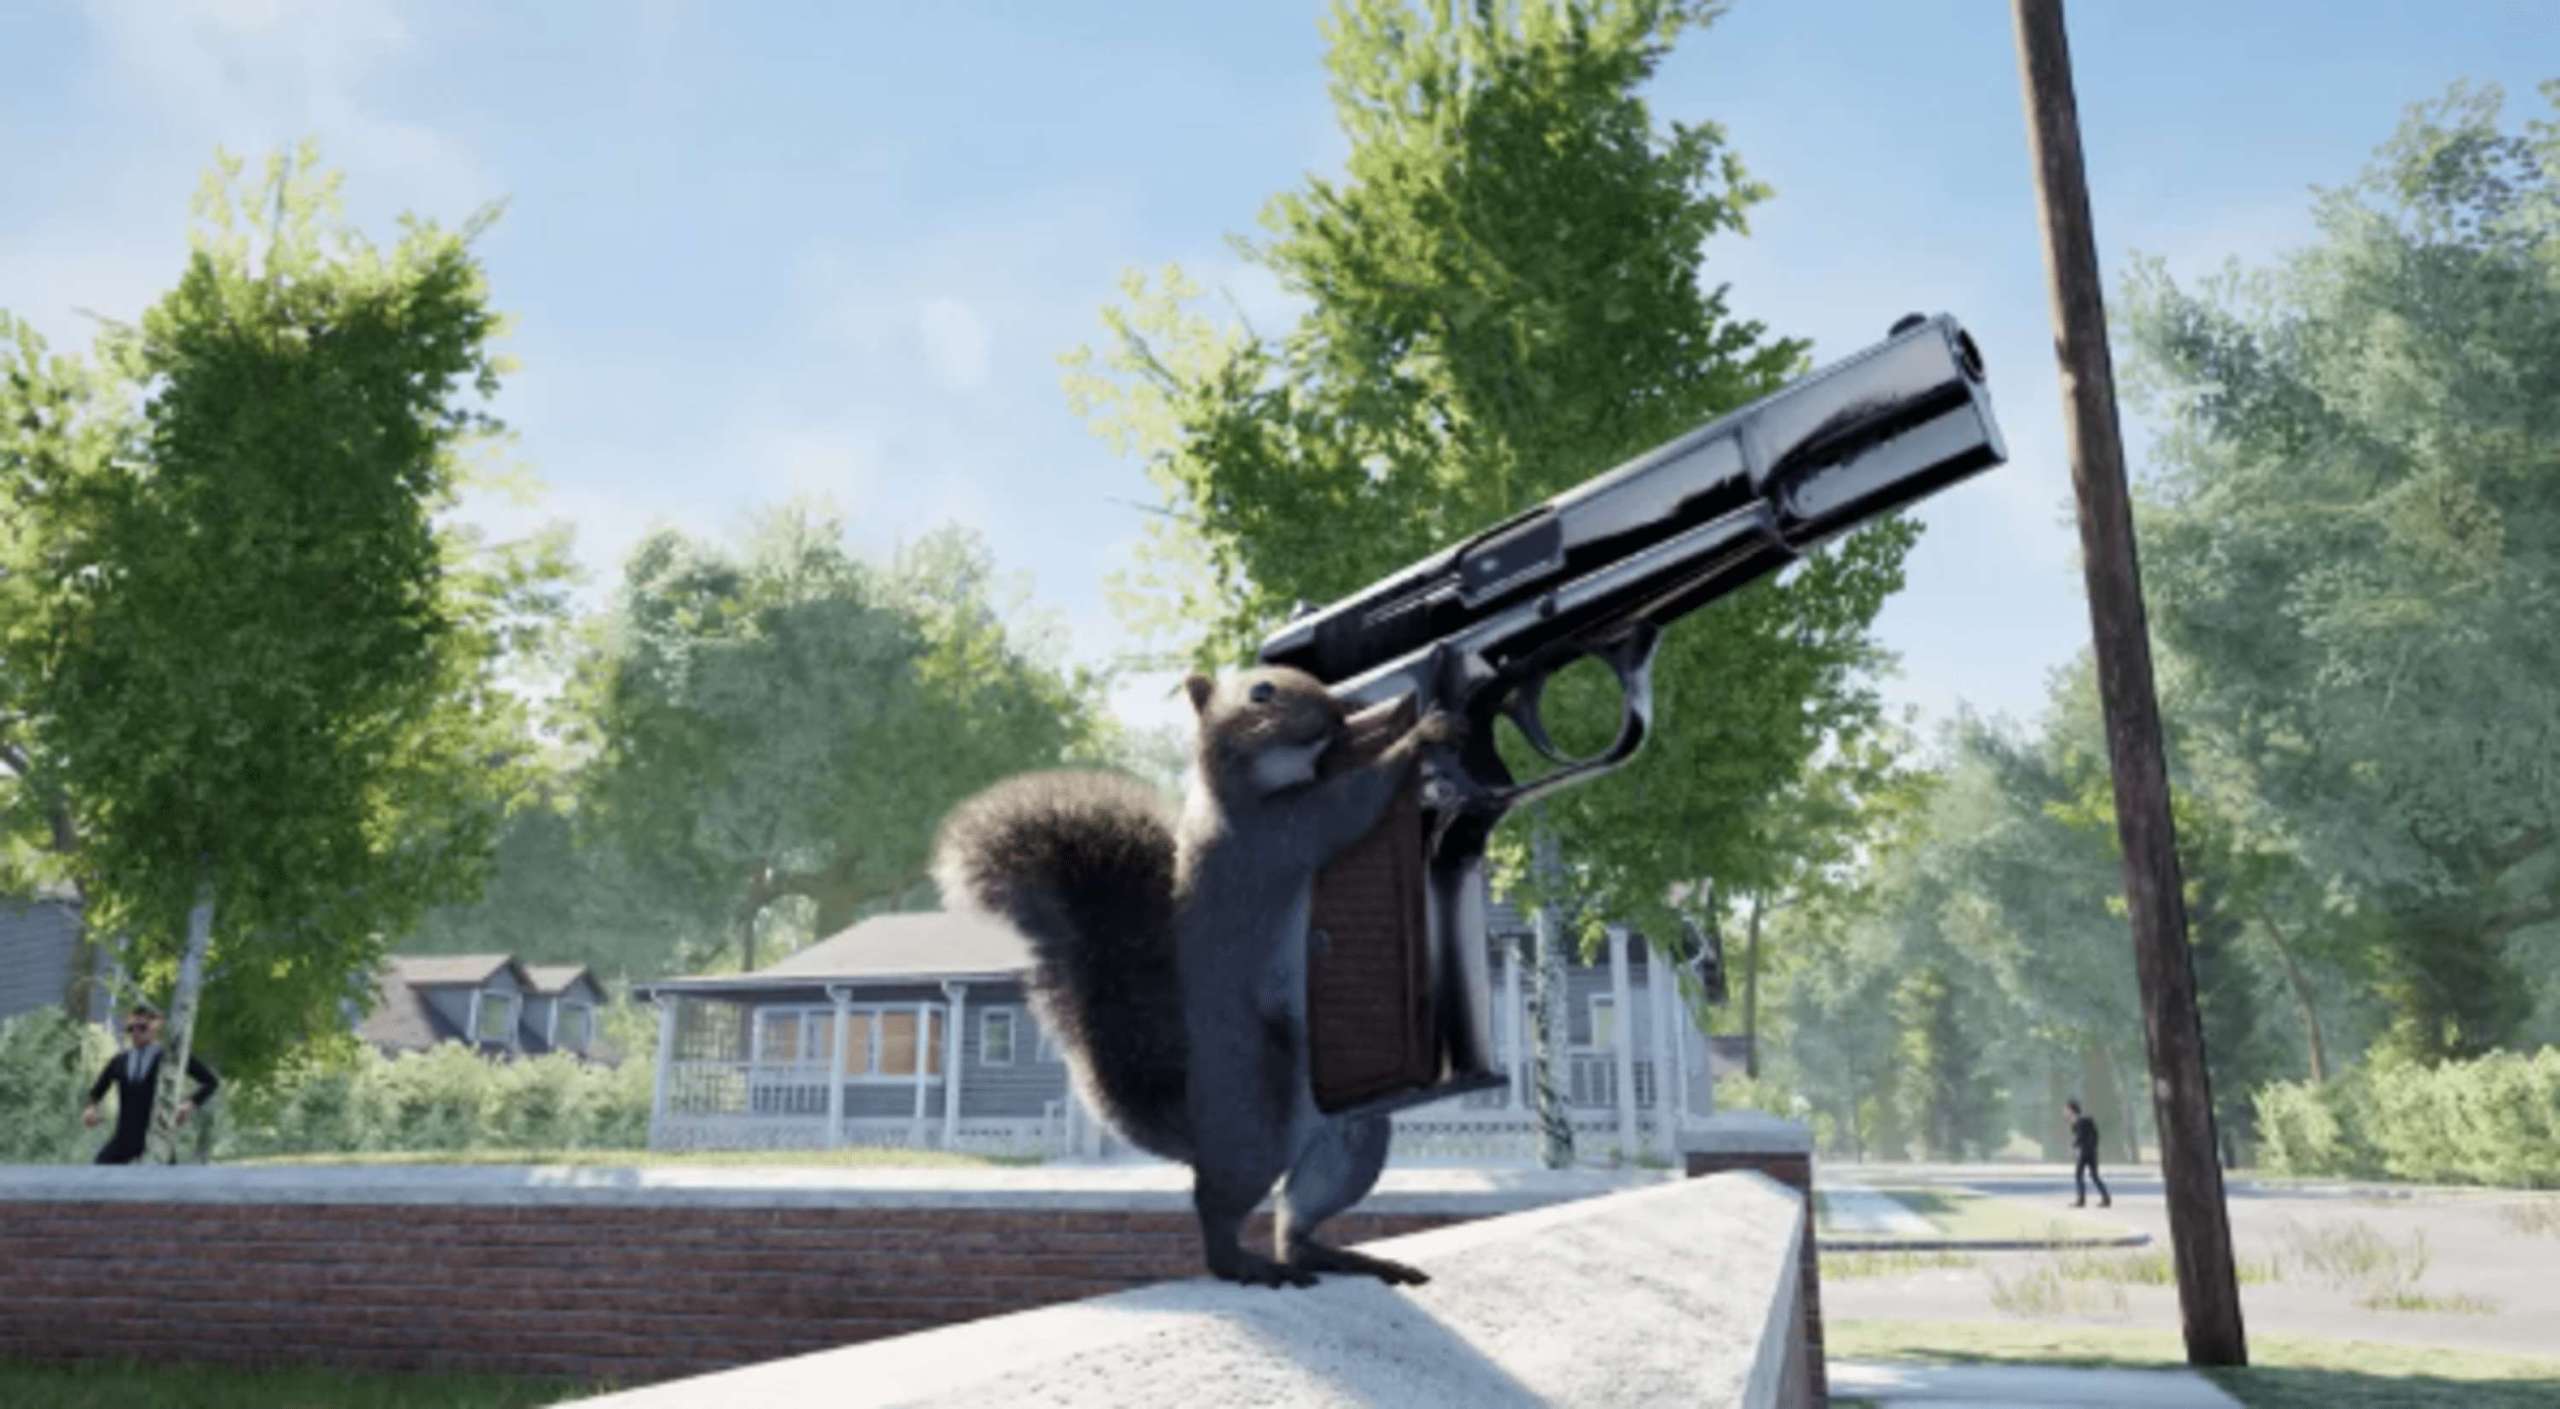 The Video Game Squirrel With A Gun Seems To Be About Precisely What It Sounds Like